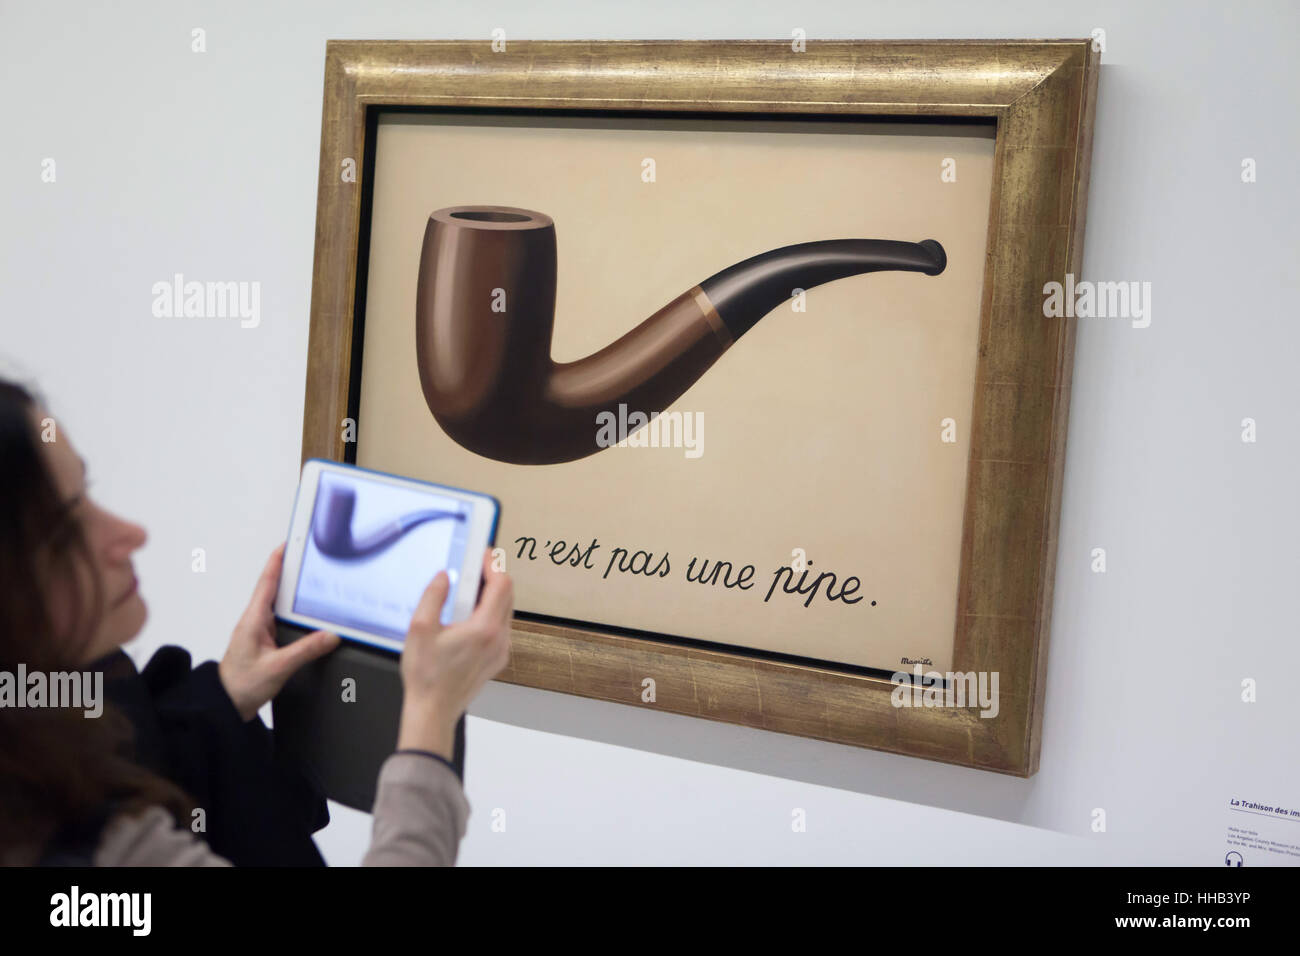 Visitor uses her tablet to photograph the painting 'La trahison des images' ('The Treachery of Images') by Belgian surrealist artist Rene Magritte (1929) displayed at his retrospective exhibition in the Centre Pompidou in Paris, France. The French inscription 'Ceci n'est pas une pipe' means 'This is not a pipe'. The exhibition entitled 'Rene Magritte. The Treachery of Images' runs till 23 January 2017. After that the reformulated version of the exhibition will be presented at the Schirn Kunsthalle in Frankfurt am Main, Germany, from 10 February to 5 June 2017. Stock Photo